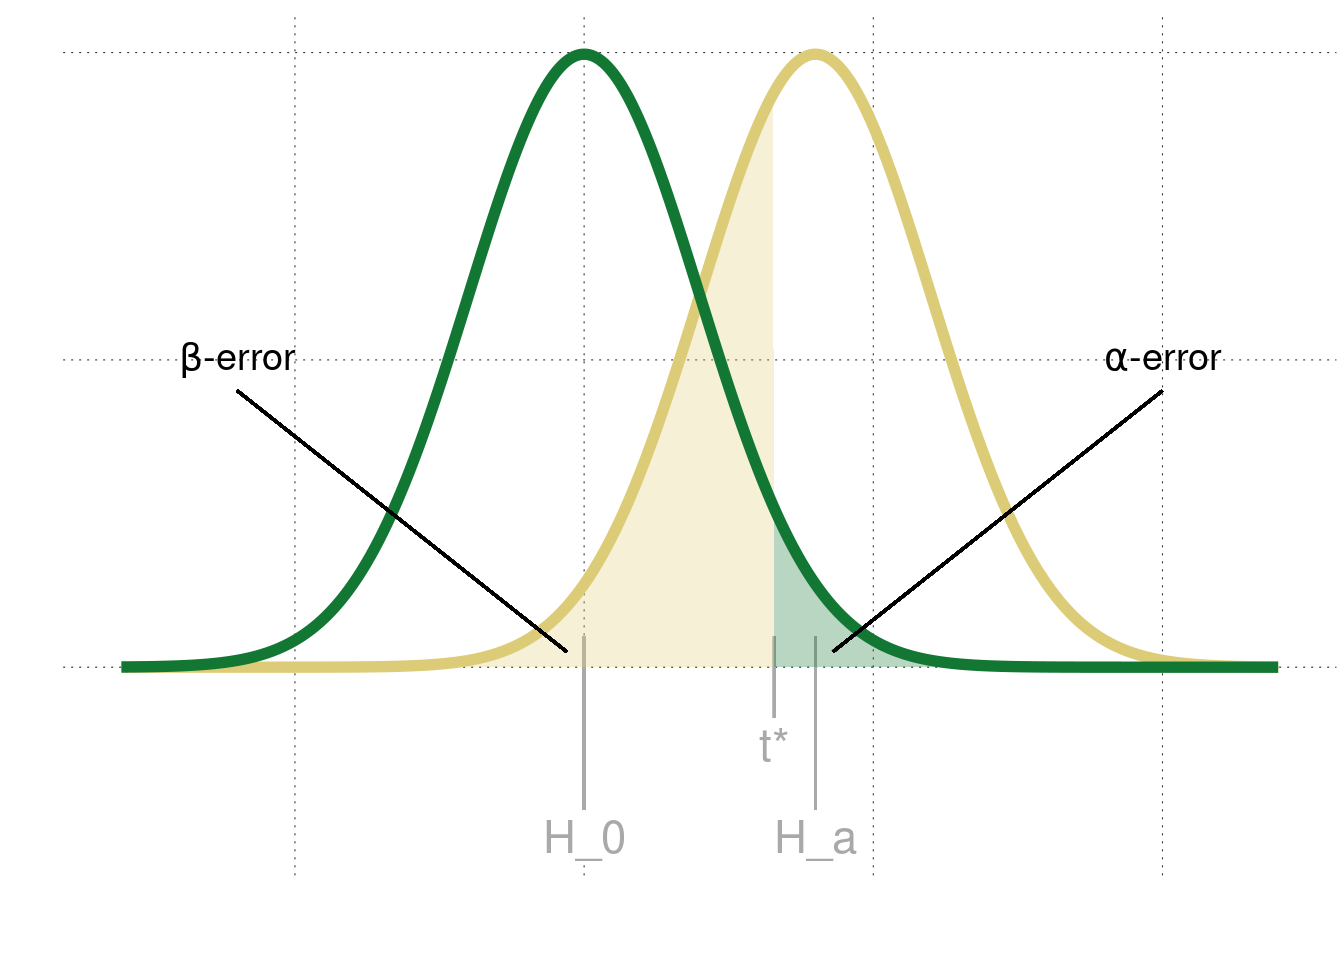 Schematic representation of $\alpha$- and $\beta$-errors. The green curve is the sampling distribution of some test statistic under the assumption that the null hypothesis is true. The yellow curve is the sampling distribution for the alternative hypothesis. The decision criterion for an N-P test is indicated as $t^*$. The shaded regions show the probabilities of falsely rejecting a true null hypothesis (in green) and that of false accepting a false alternative hypothesis.